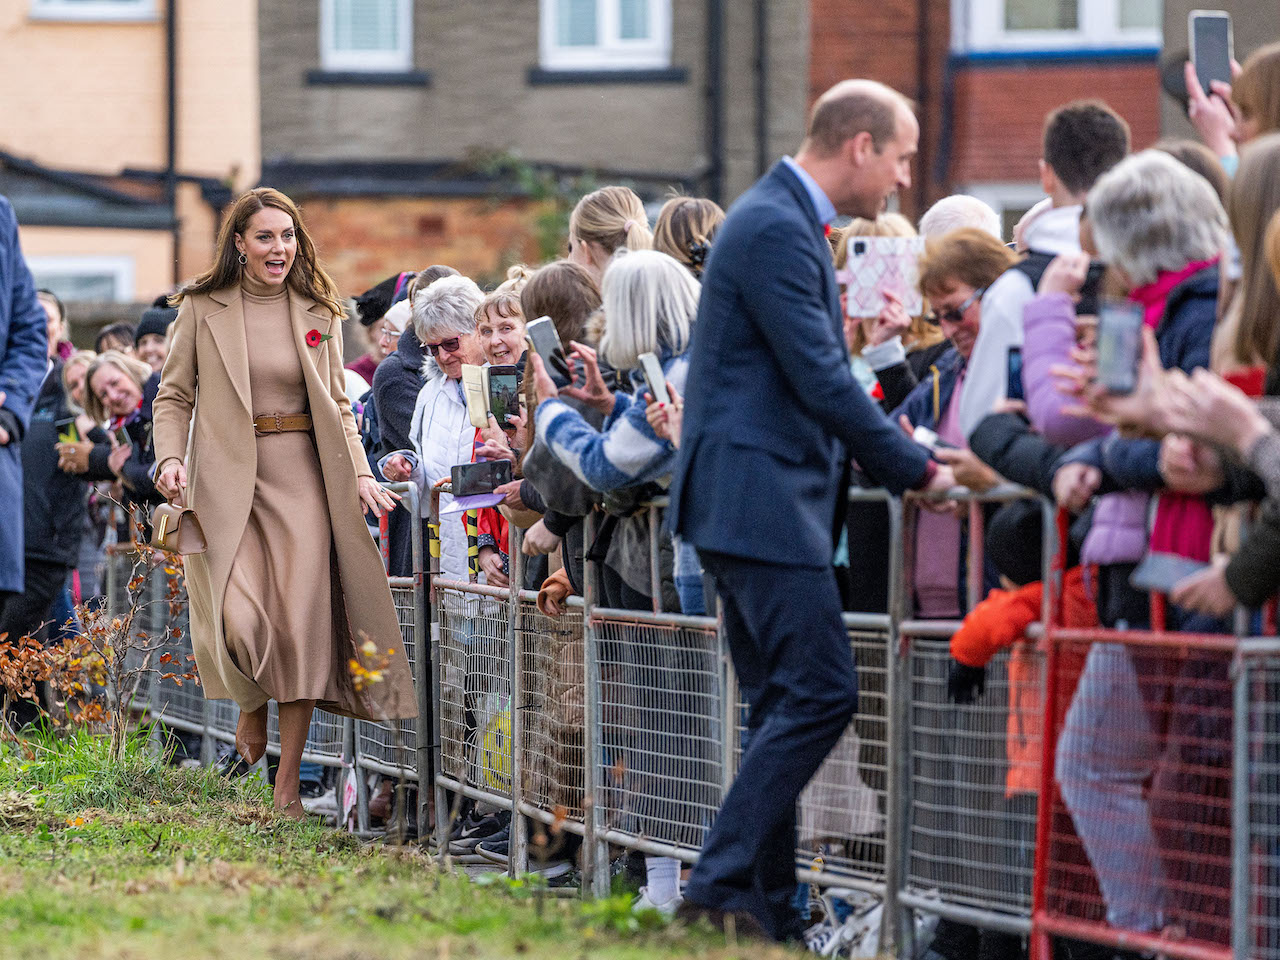 Kate Middleton, Princess of Wales, and Prince William, Prince of Wales greet the public as they arrive to visit "The Street."